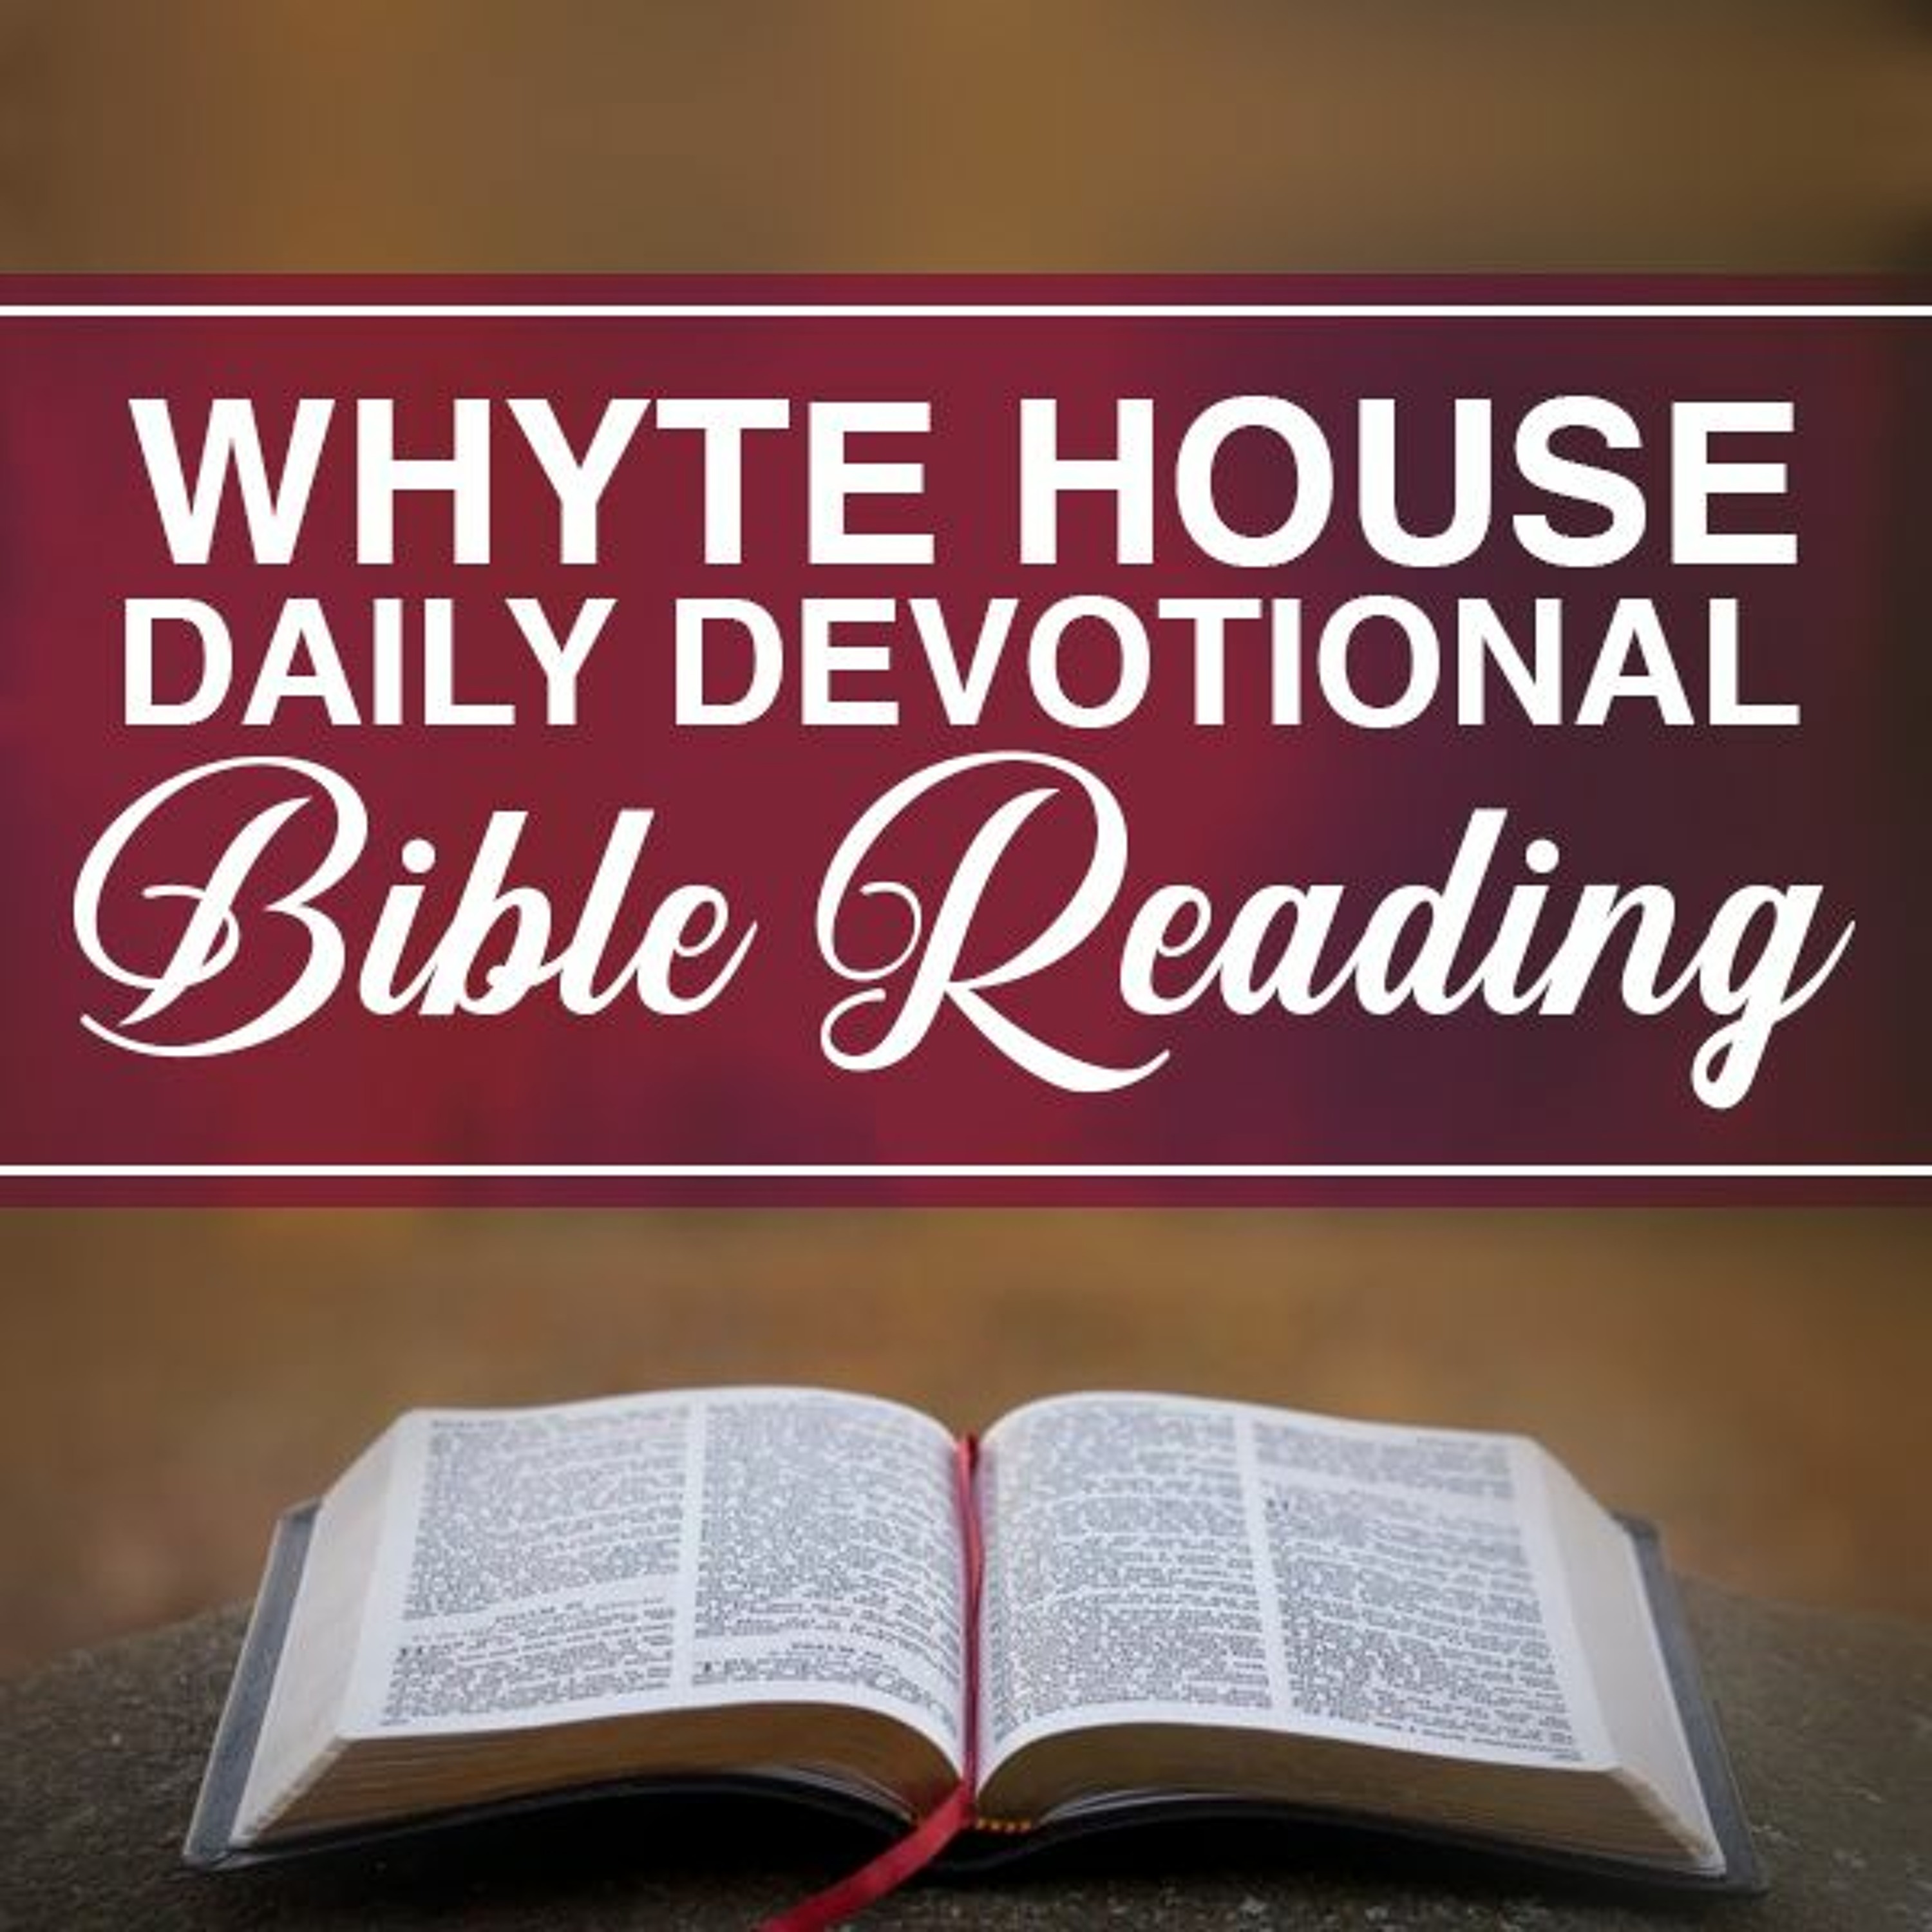 Whyte House Daily Reading of the Chronological Bible #706: I Kings 14:19-20